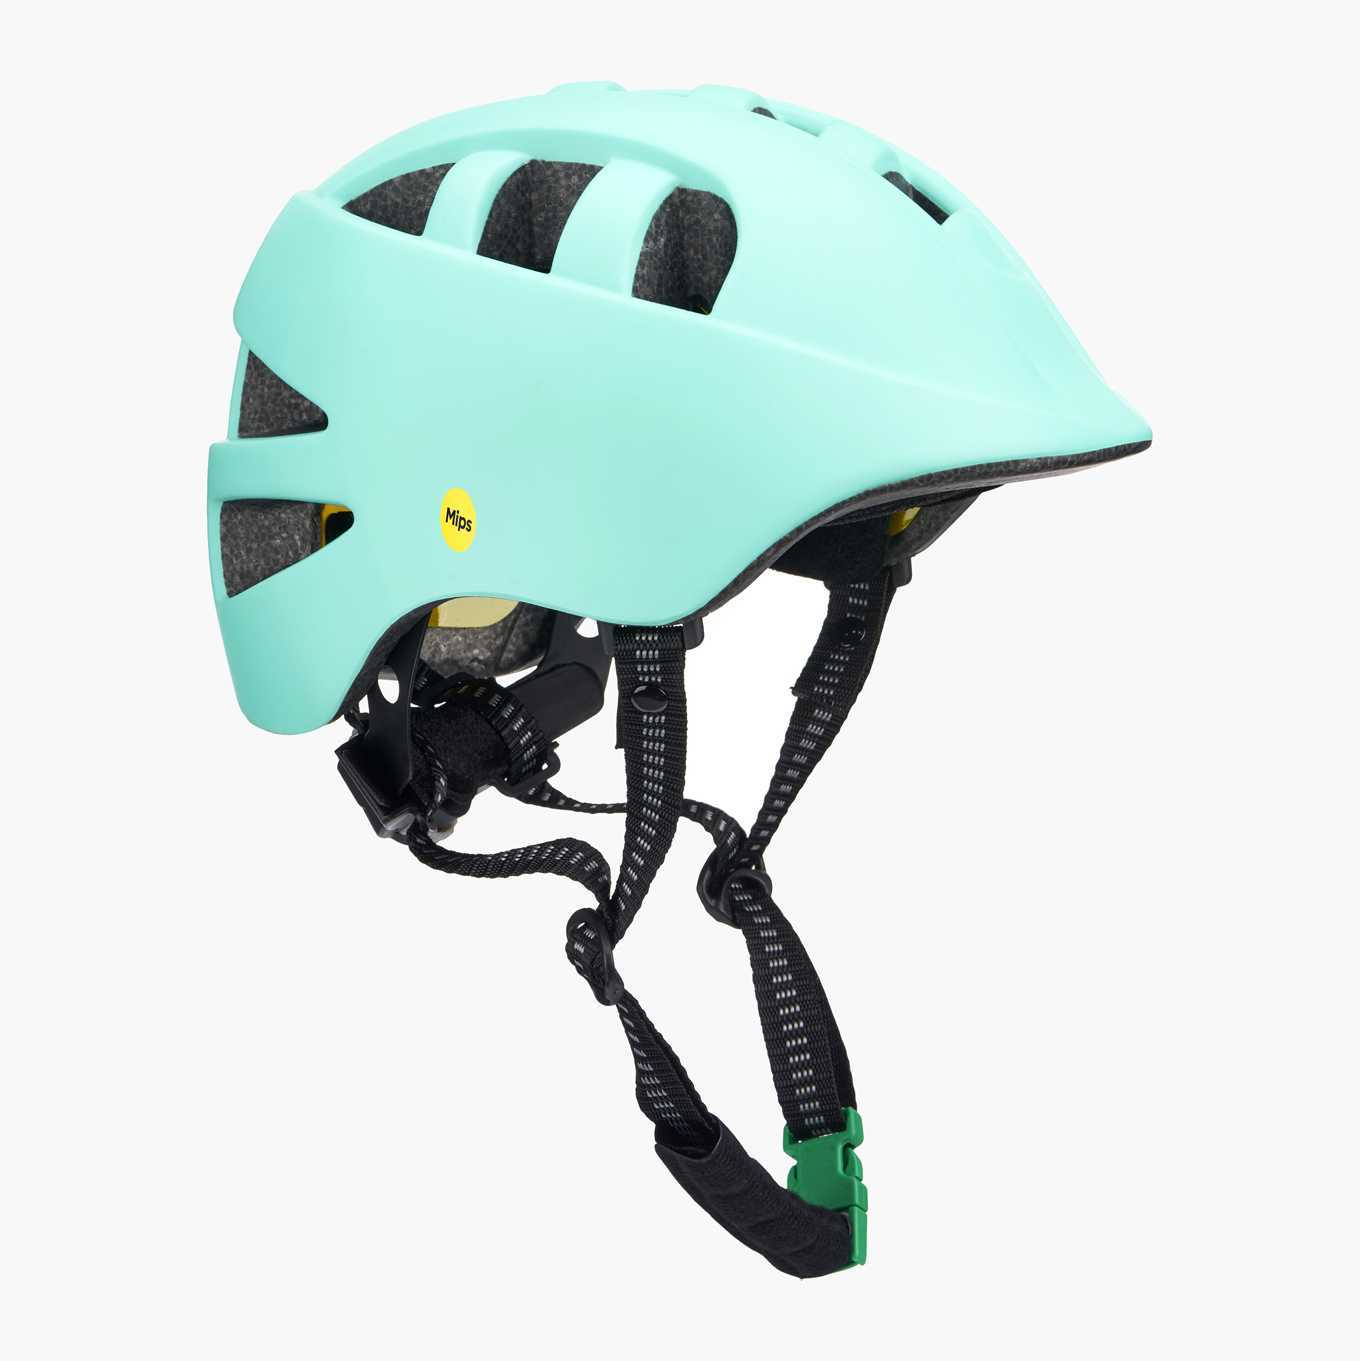 Bicycles--Equipment and supplies, Bicycle helmet, Sports equipment, Head, Headgear